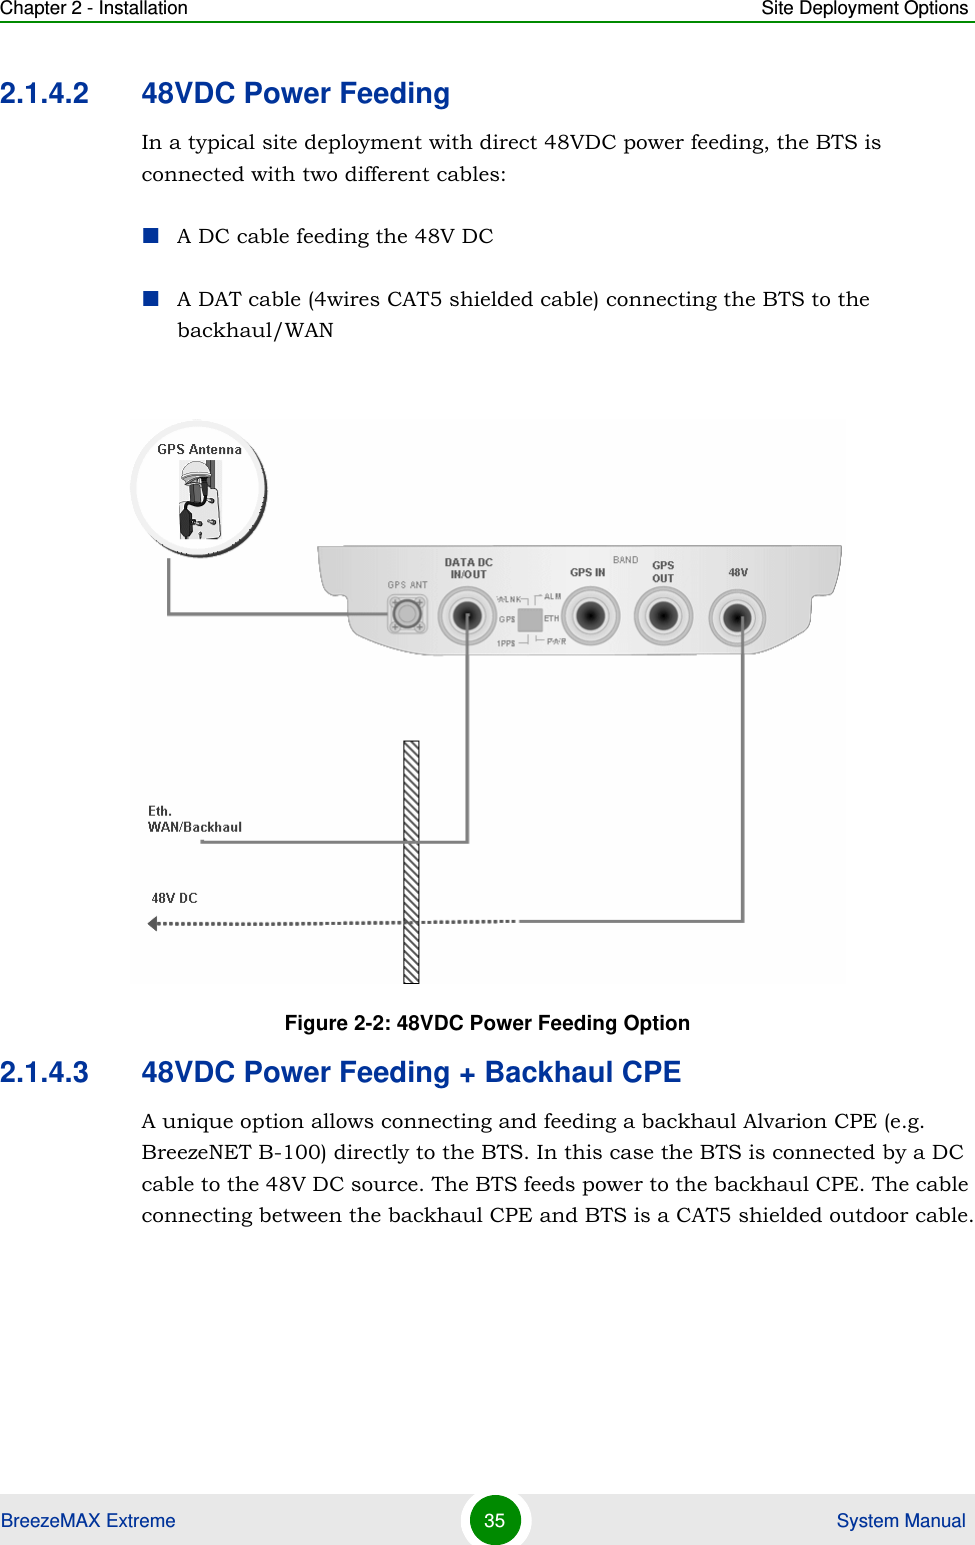 Chapter 2 - Installation Site Deployment OptionsBreezeMAX Extreme 35  System Manual2.1.4.2 48VDC Power FeedingIn a typical site deployment with direct 48VDC power feeding, the BTS is connected with two different cables:A DC cable feeding the 48V DCA DAT cable (4wires CAT5 shielded cable) connecting the BTS to the backhaul/WAN2.1.4.3 48VDC Power Feeding + Backhaul CPEA unique option allows connecting and feeding a backhaul Alvarion CPE (e.g. BreezeNET B-100) directly to the BTS. In this case the BTS is connected by a DC cable to the 48V DC source. The BTS feeds power to the backhaul CPE. The cable connecting between the backhaul CPE and BTS is a CAT5 shielded outdoor cable.Figure 2-2: 48VDC Power Feeding Option